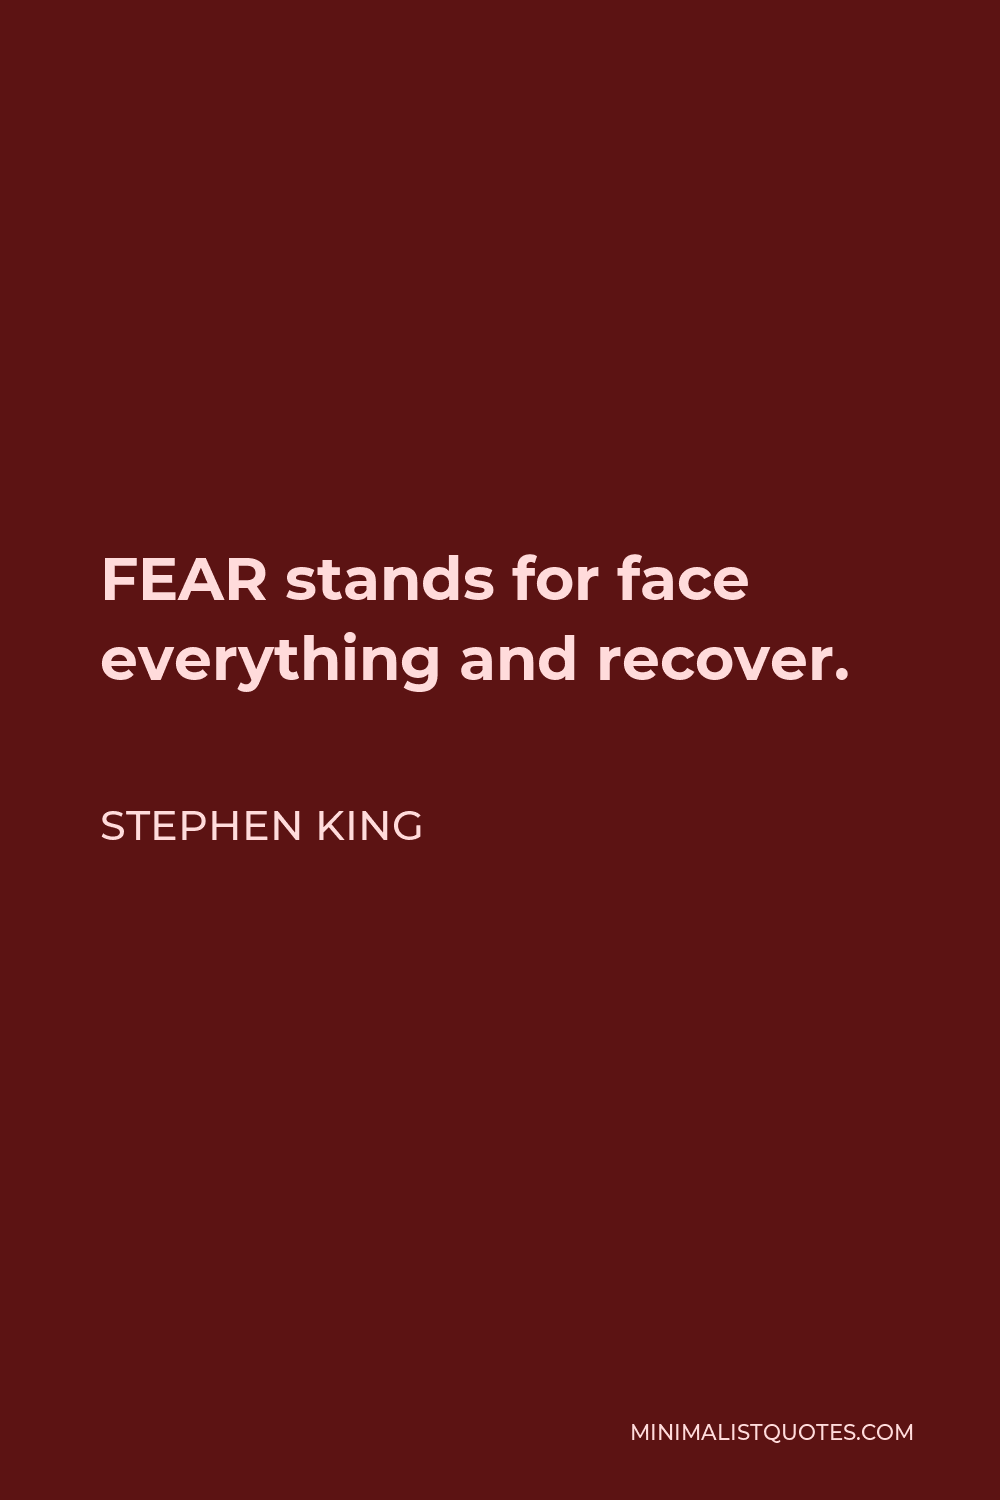 Stephen King Quote - FEAR stands for face everything and recover.